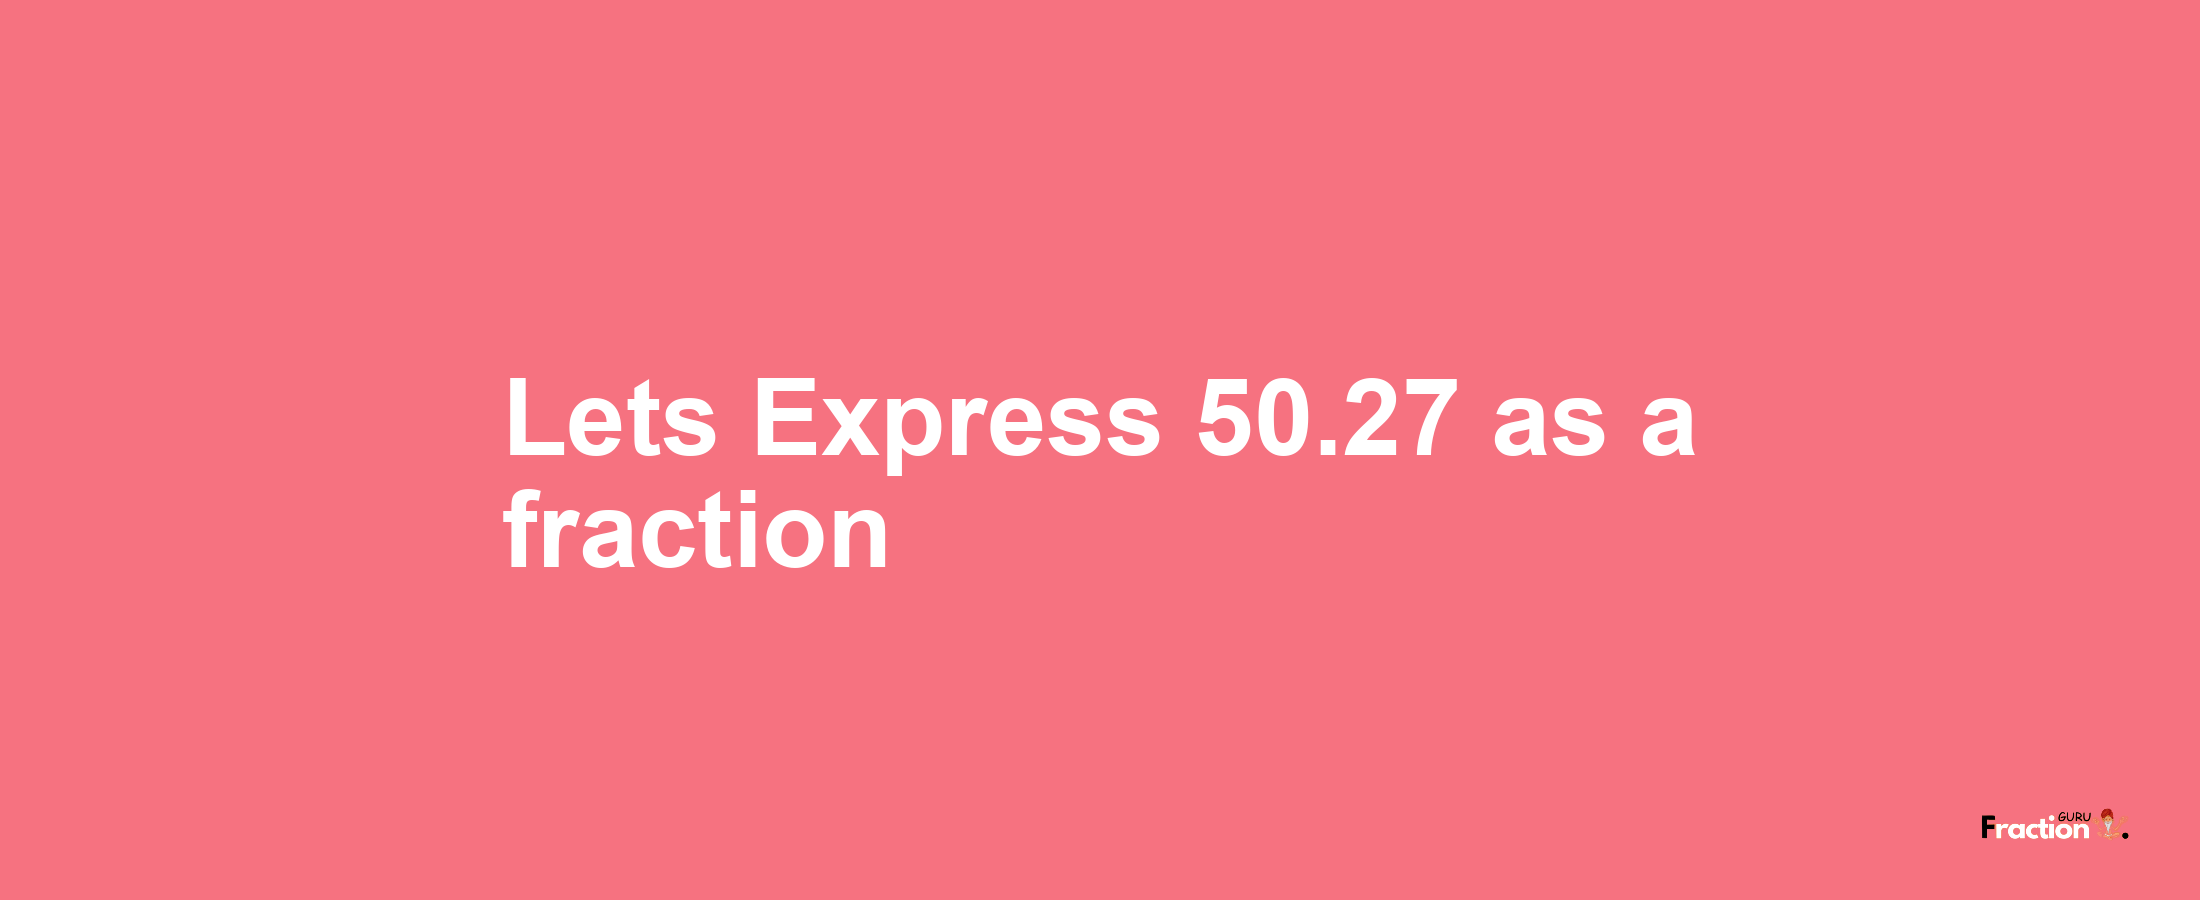 Lets Express 50.27 as afraction